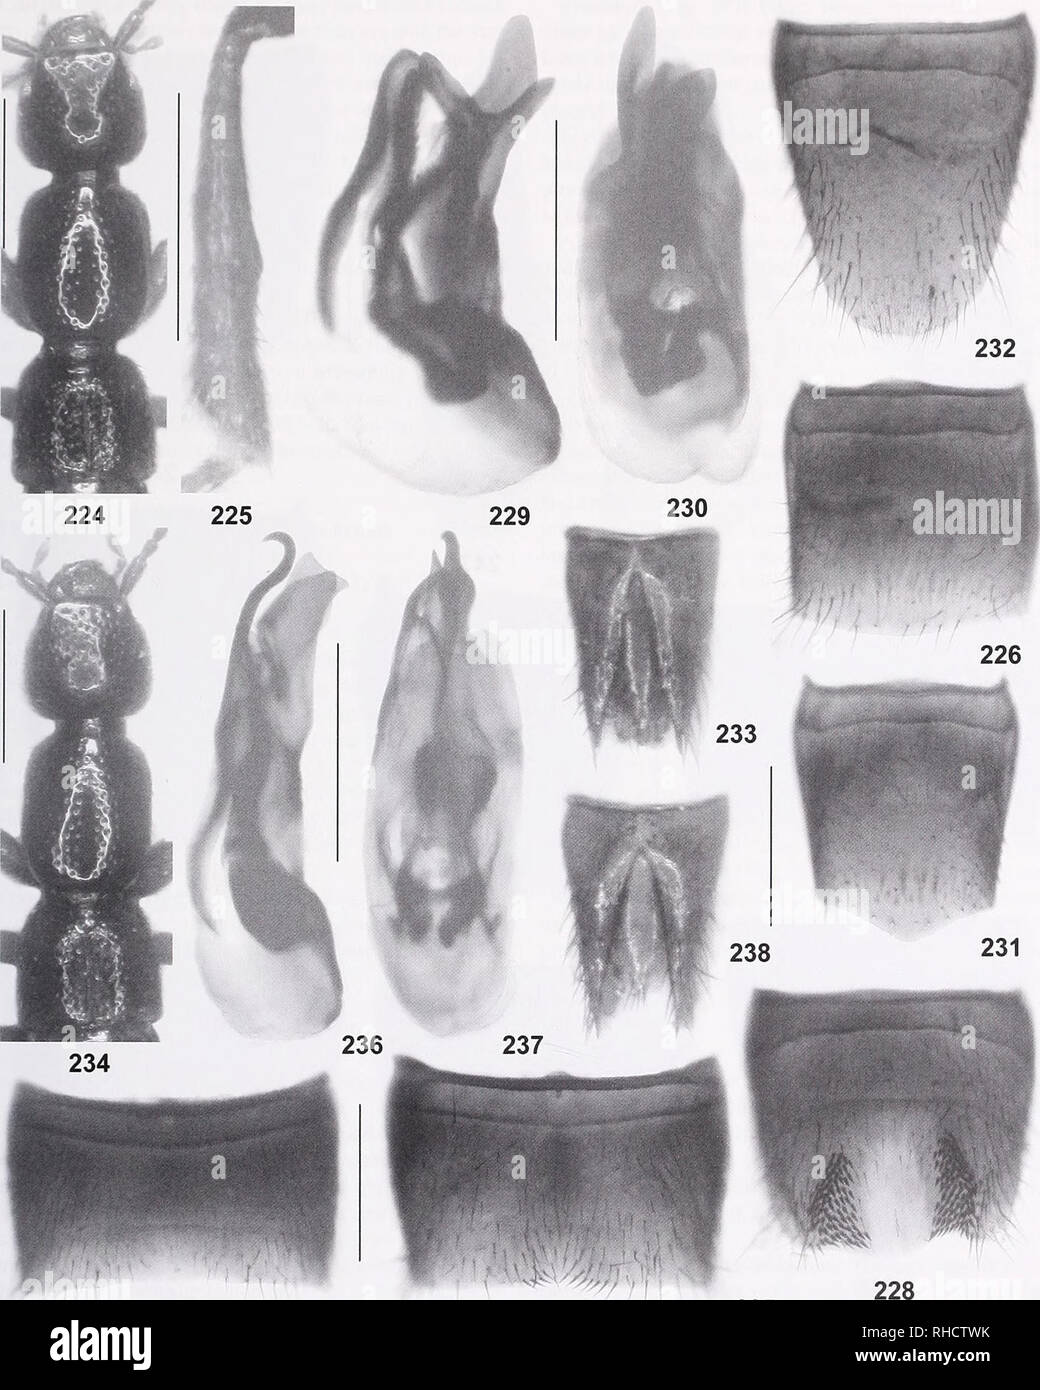 . Bonn zoological bulletin. Zoology. The Lathrobium fauna of the Qinling Shan and the Daba Shan, China 81. Figs 224-238. Lathrobium trifldum (224-233) and L. bifidum (234-238). 224, 234. Forebody. 225. Male metatibia. 226. Male tergite VIII. 227, 235. Male sternite VII. 228. Male sternite VIII. 229-230, 236-237. Aedeagus in lateral and in ventral view. 231. Female tergite VIII. 232. Female sternite VIII. 233, 238. Female tergites FX-X. Scale bars: 224, 234: 1.0 mm; 225-233, 235-238: 0.5 mm. Bonn zoological Bulletin 62 (1): 30-91 ©ZFMK. Please note that these images are extracted from scanned p Stock Photo